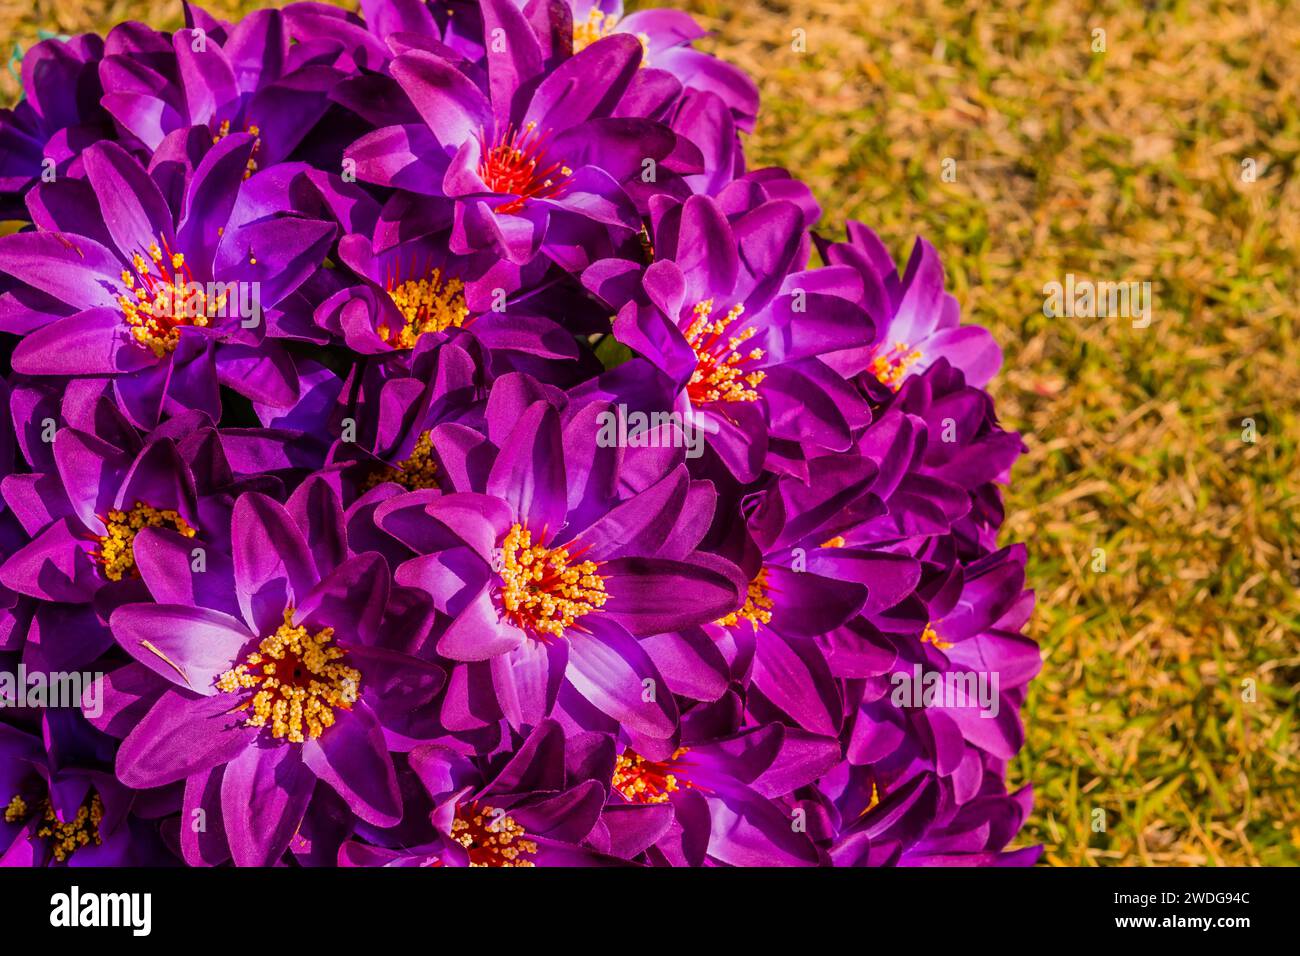 Bouquet of artificial purple flowers with yellow center with grass blurred out in background, South Korea, South Korea Stock Photo